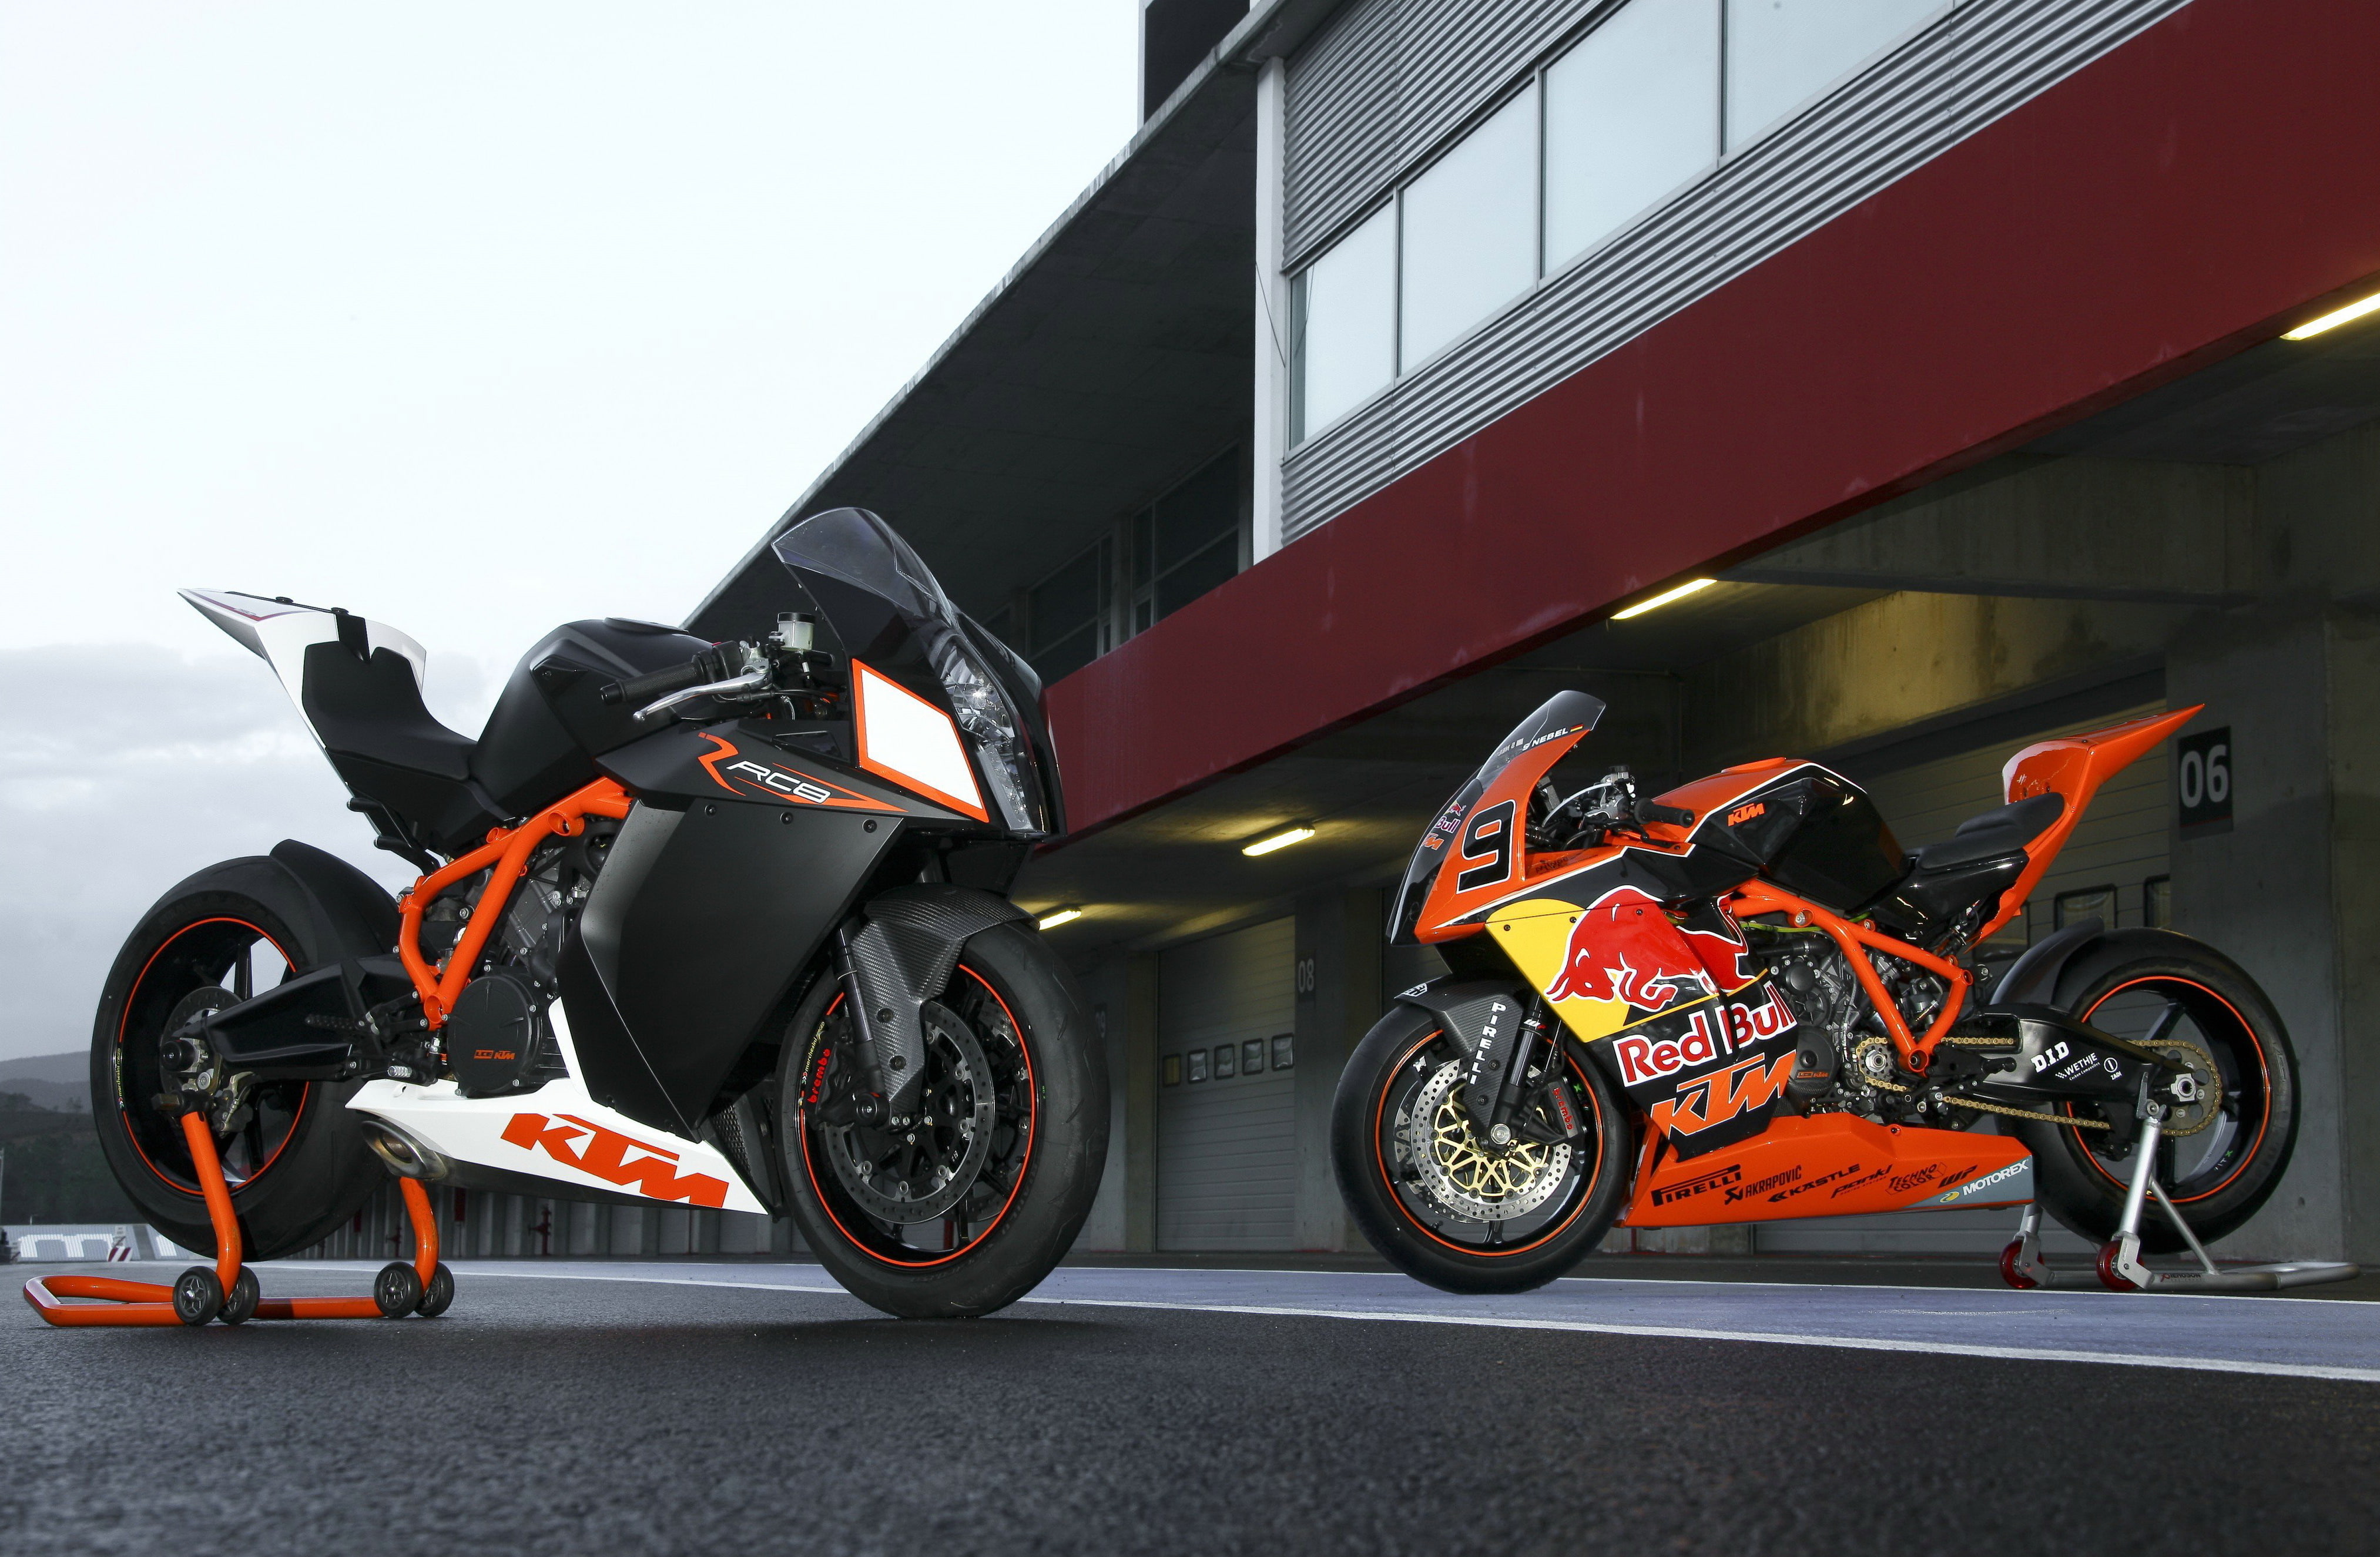 two black and orange KTM sports bikes, motorcycle, red bull, rc8